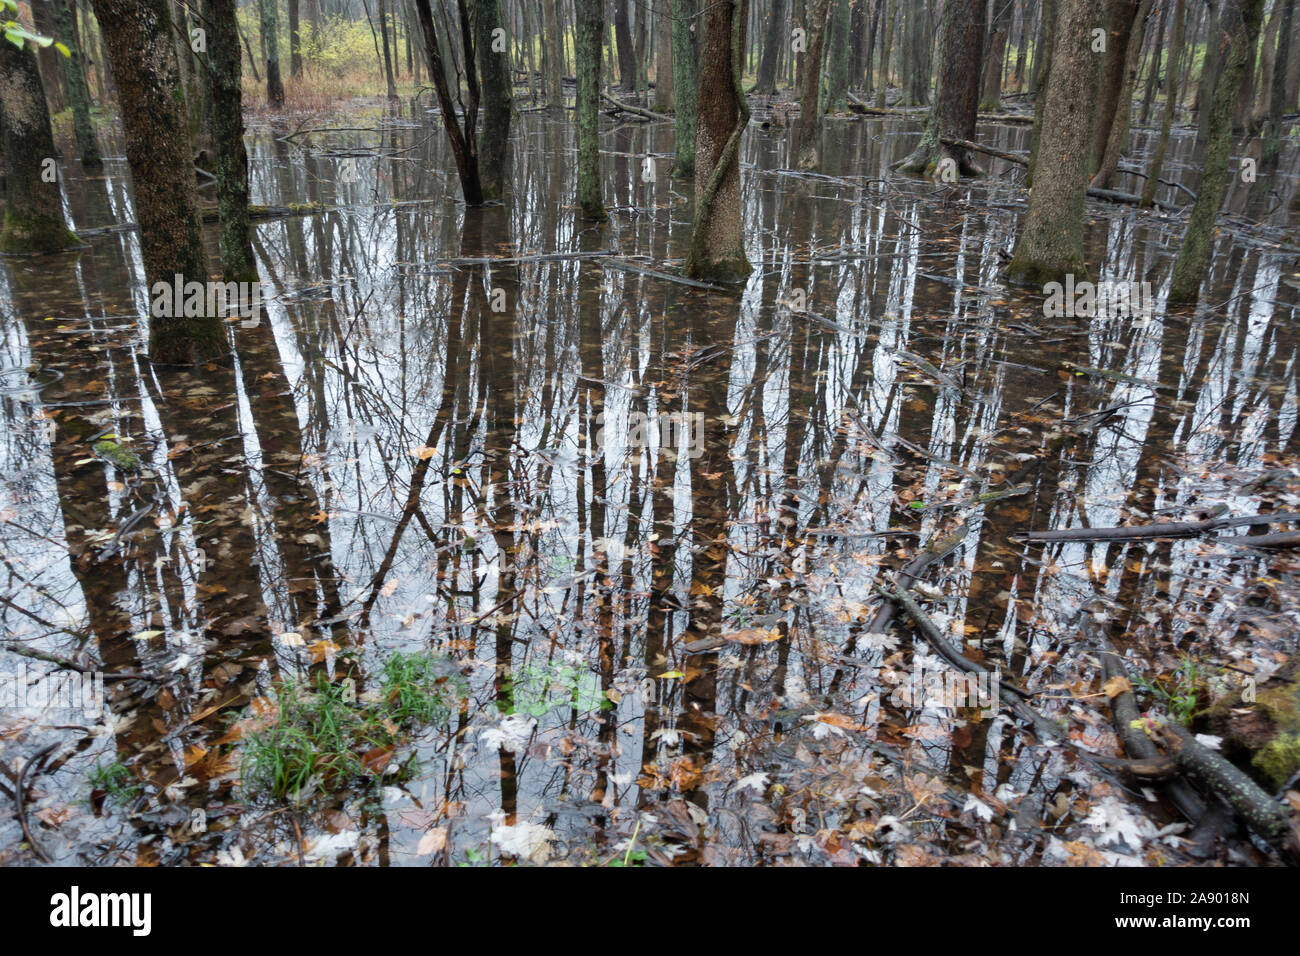 Reflections of trees in a marshy forest after a heavy rain Stock Photo